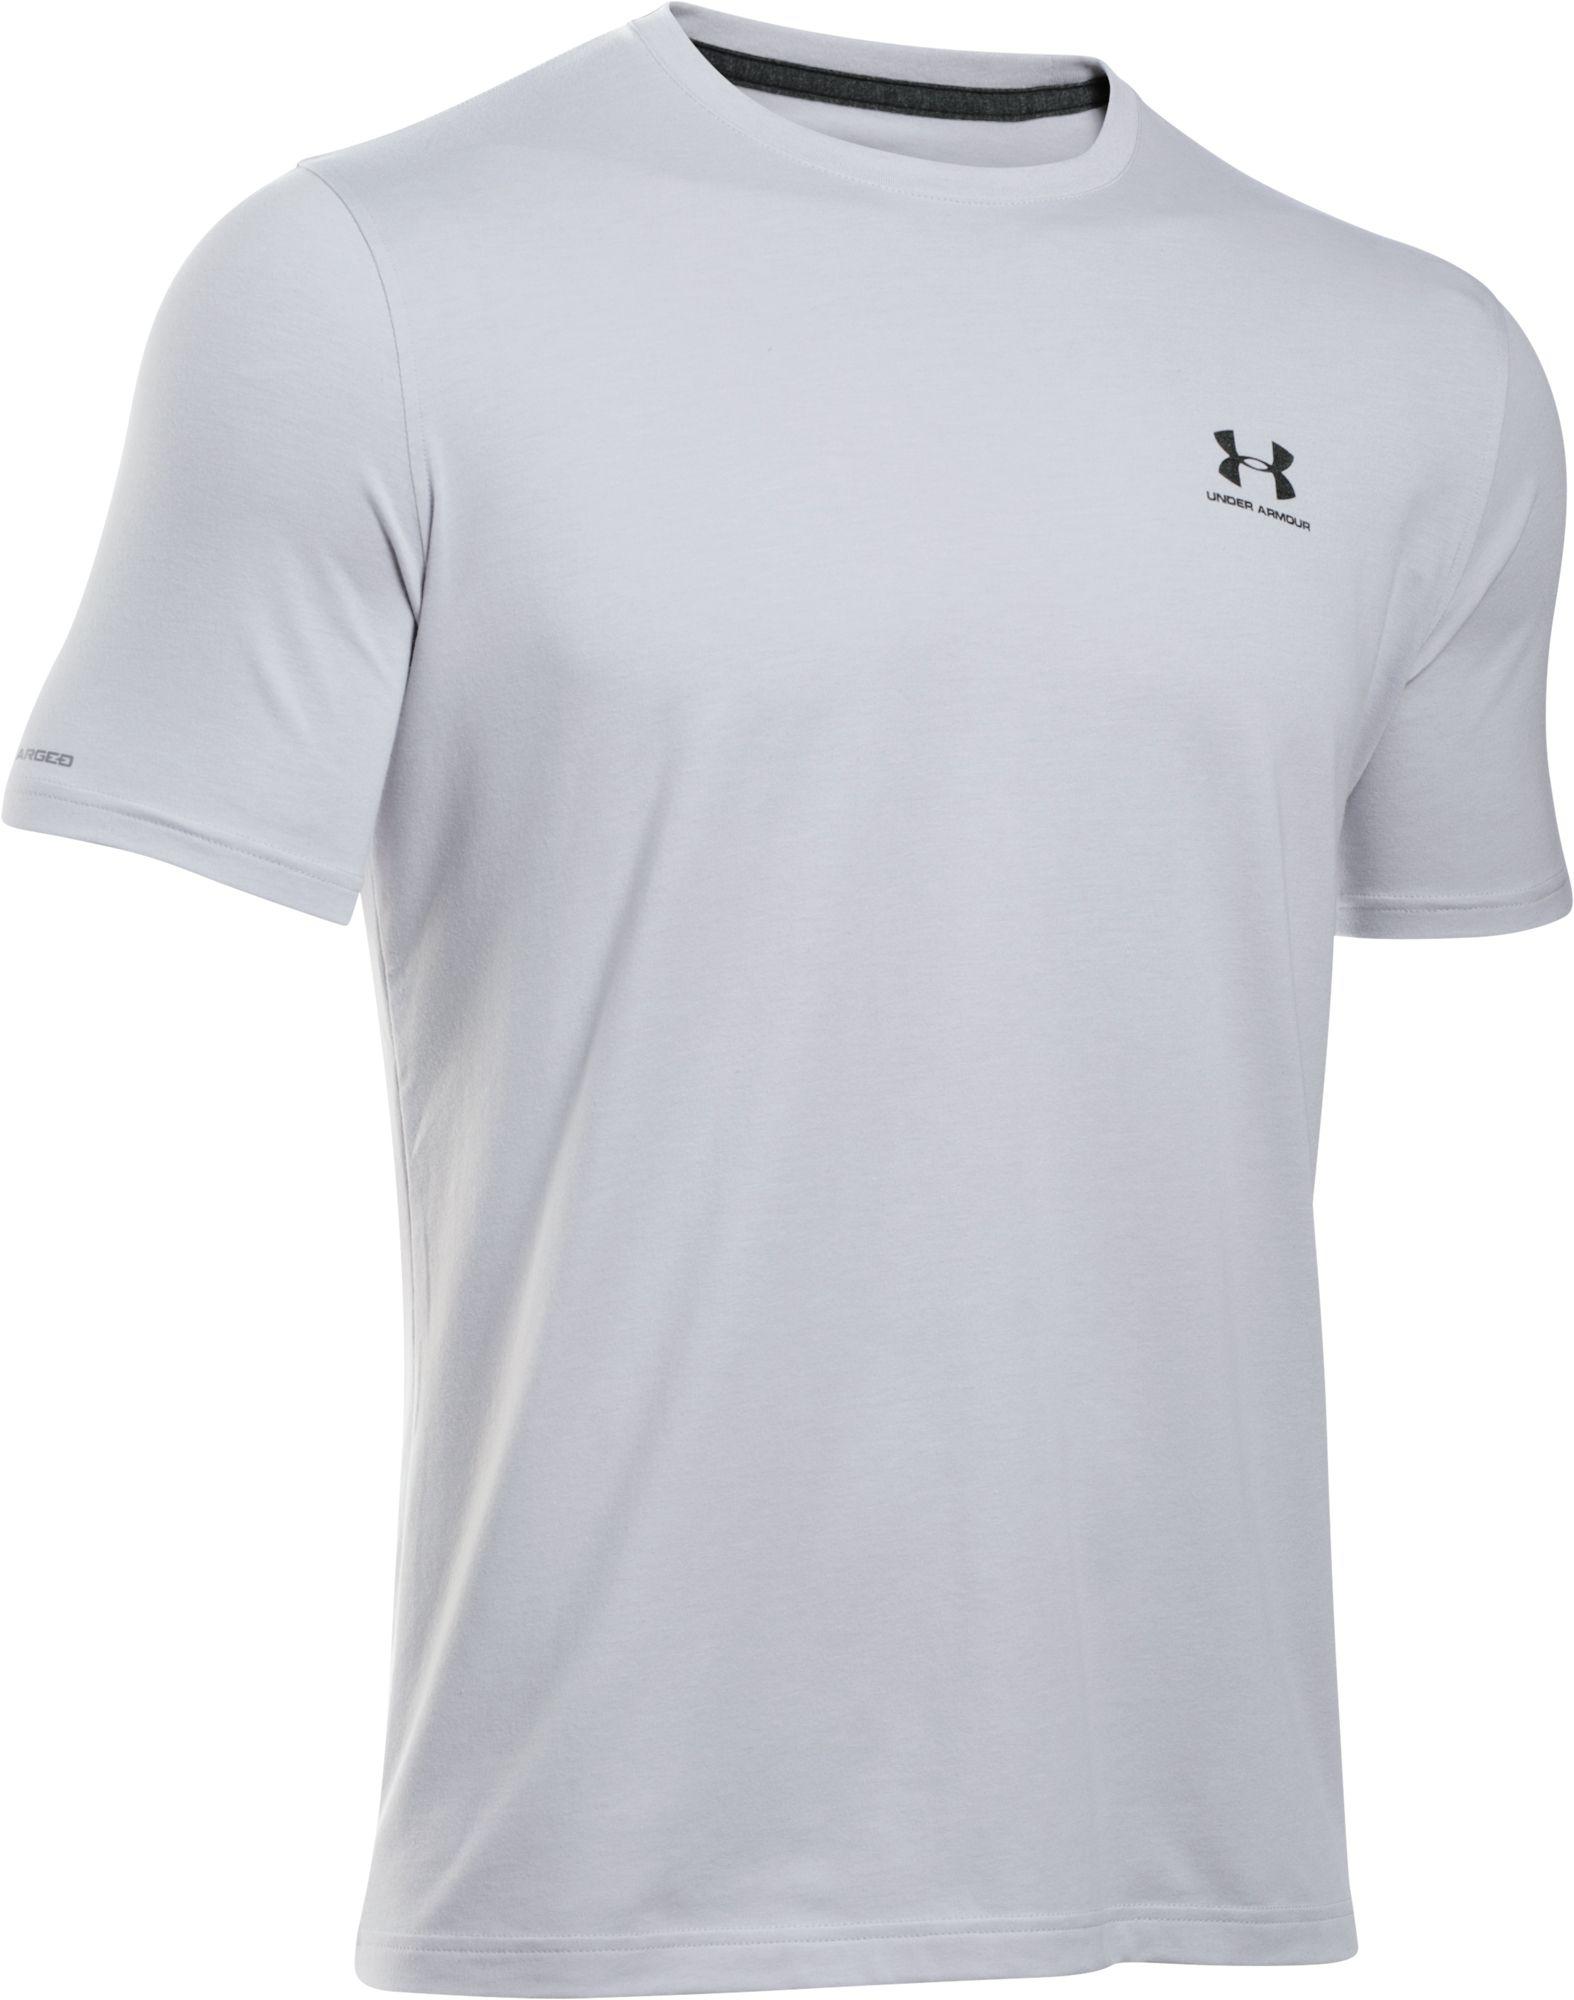 Ua Charged Cotton T Shirt on Sale, 56% OFF | www.sushithaionline.com